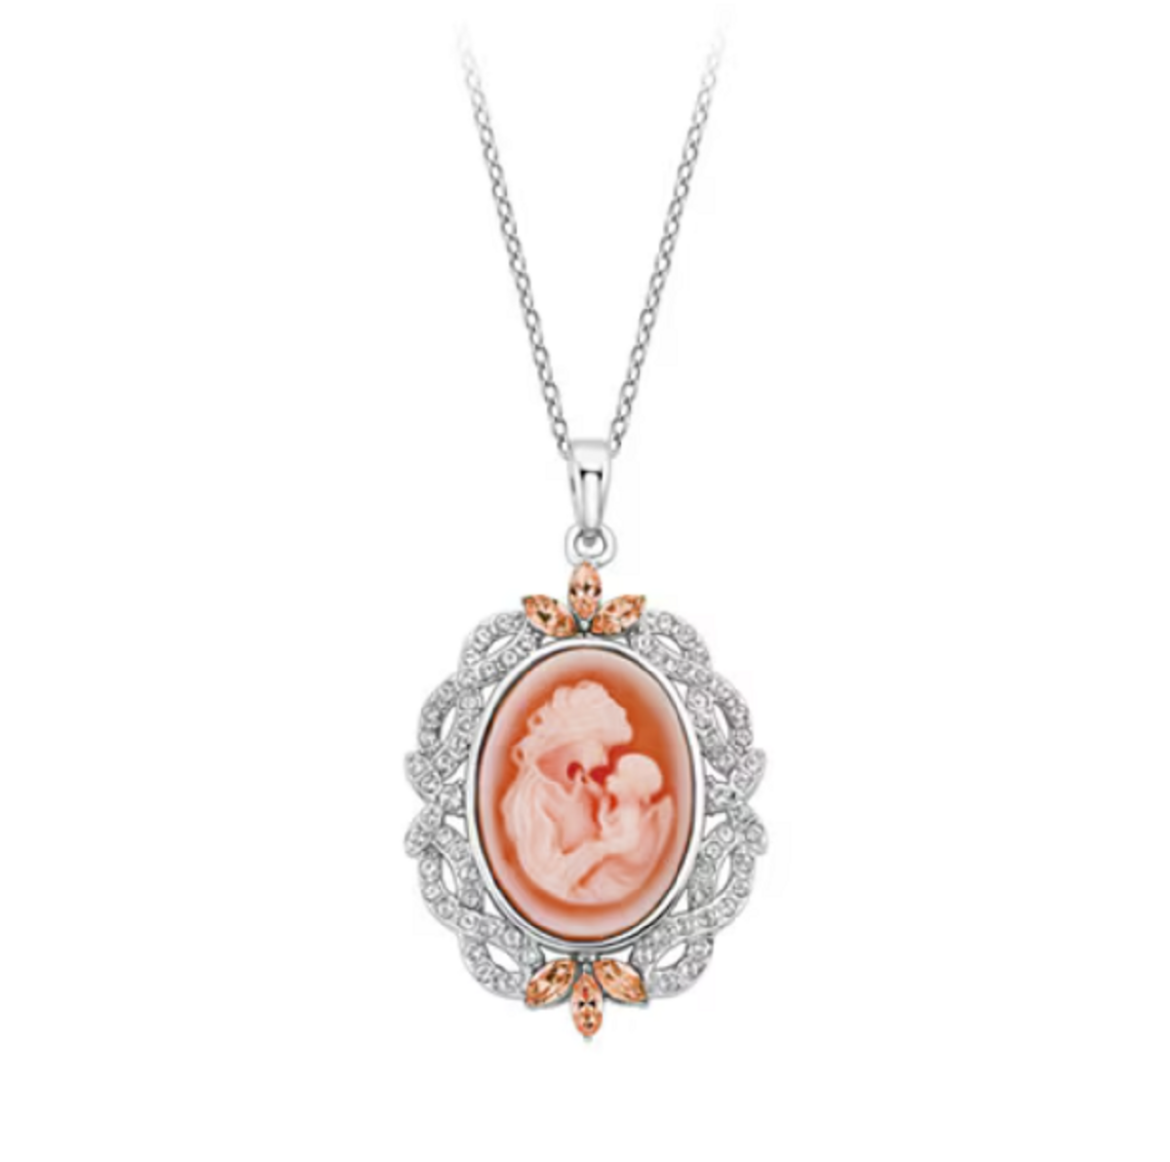 Crystal-Mother-Child-Cameo-Pendant-in-Sterling-Silver, Meaningful Gifts for Mom from Daughter